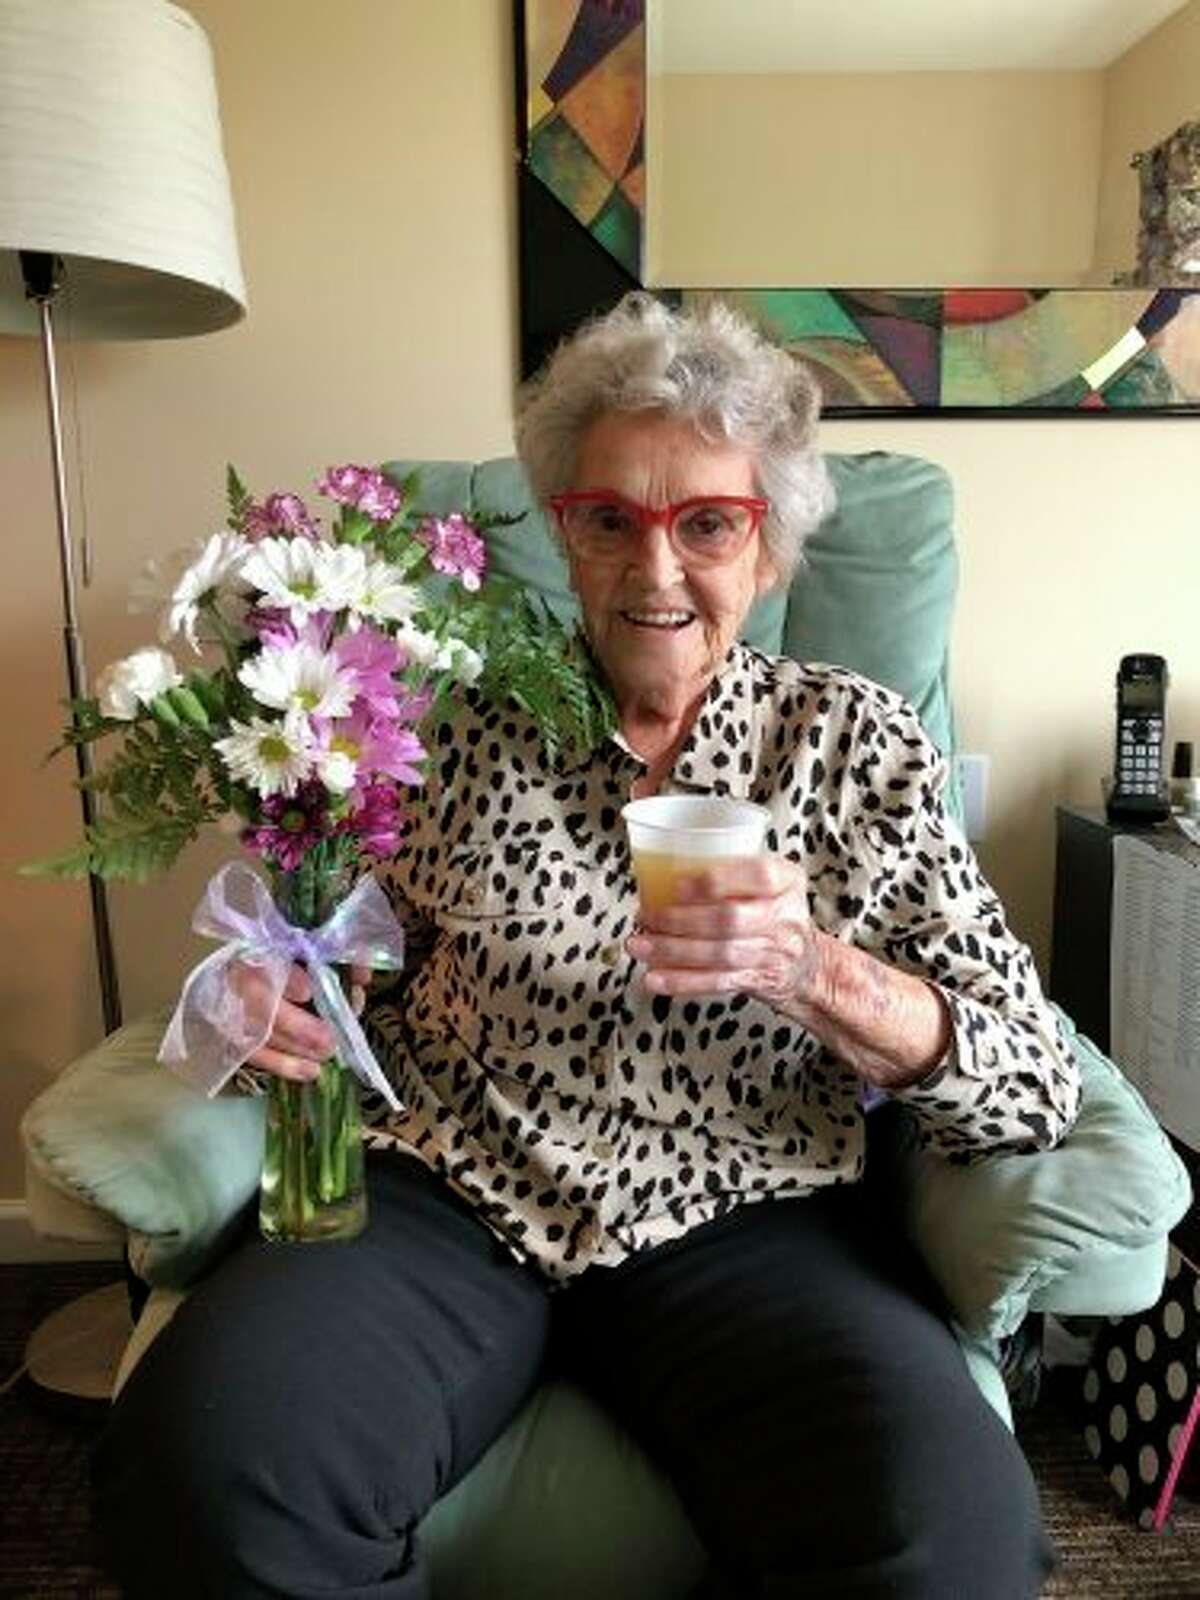 Willa Stauffer, a resident of Primrose Retirement Community, happily enjoys a beverage and a bouquet of fresh-cut flowers in her Midland home. (Photo provided)